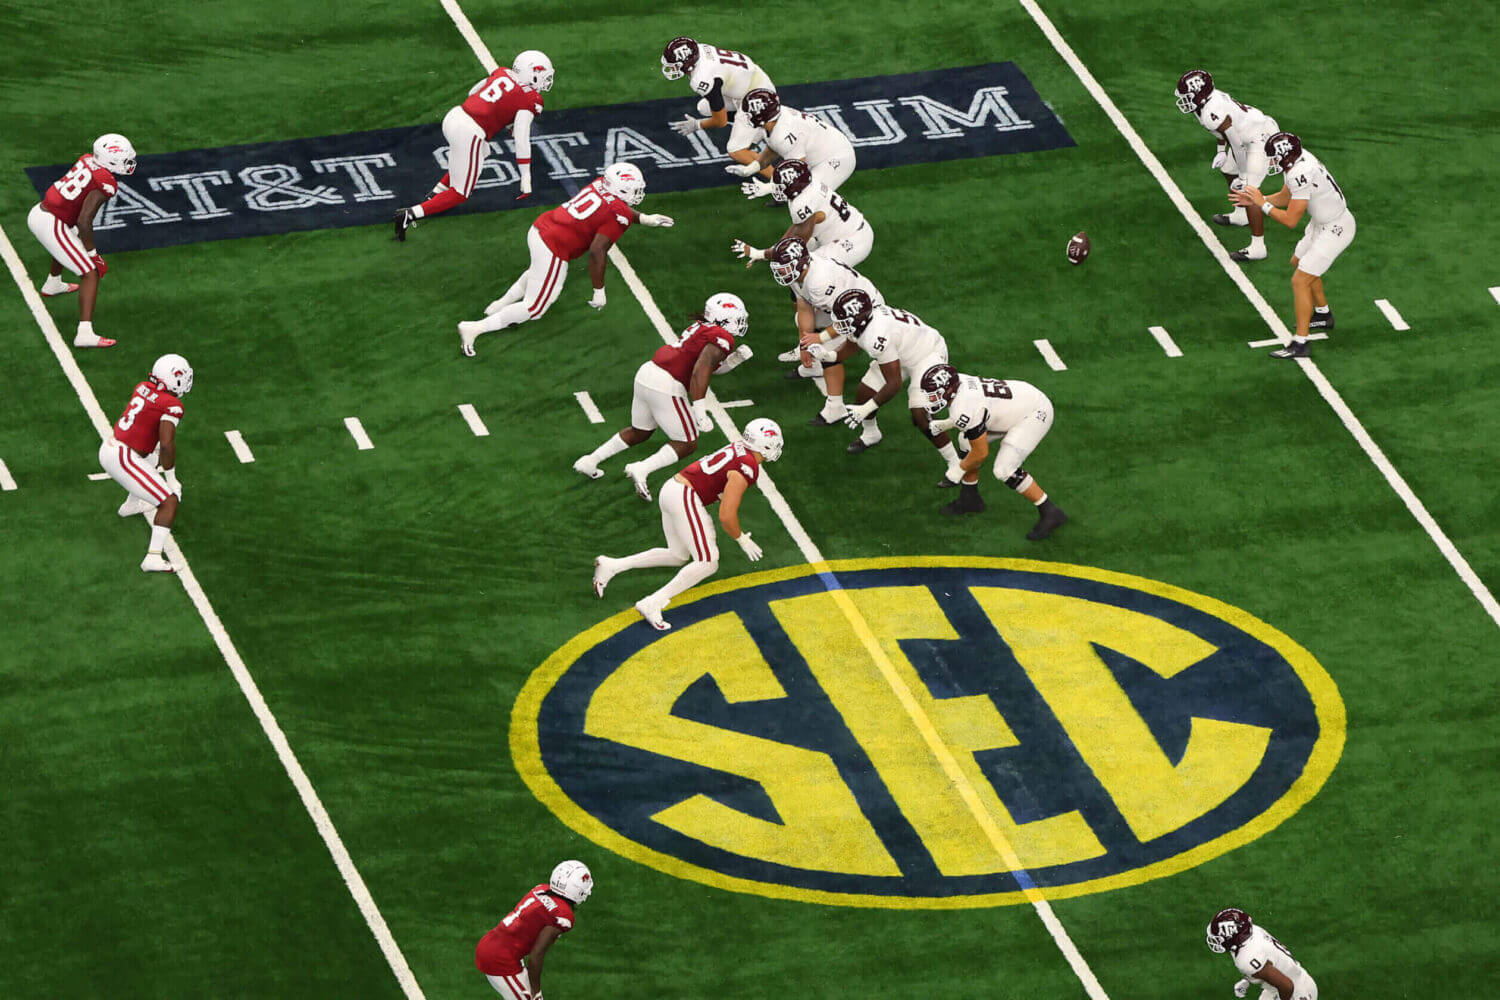 CFB realignment's alternative timeline: If Arkansas hadn't landed in the SEC...